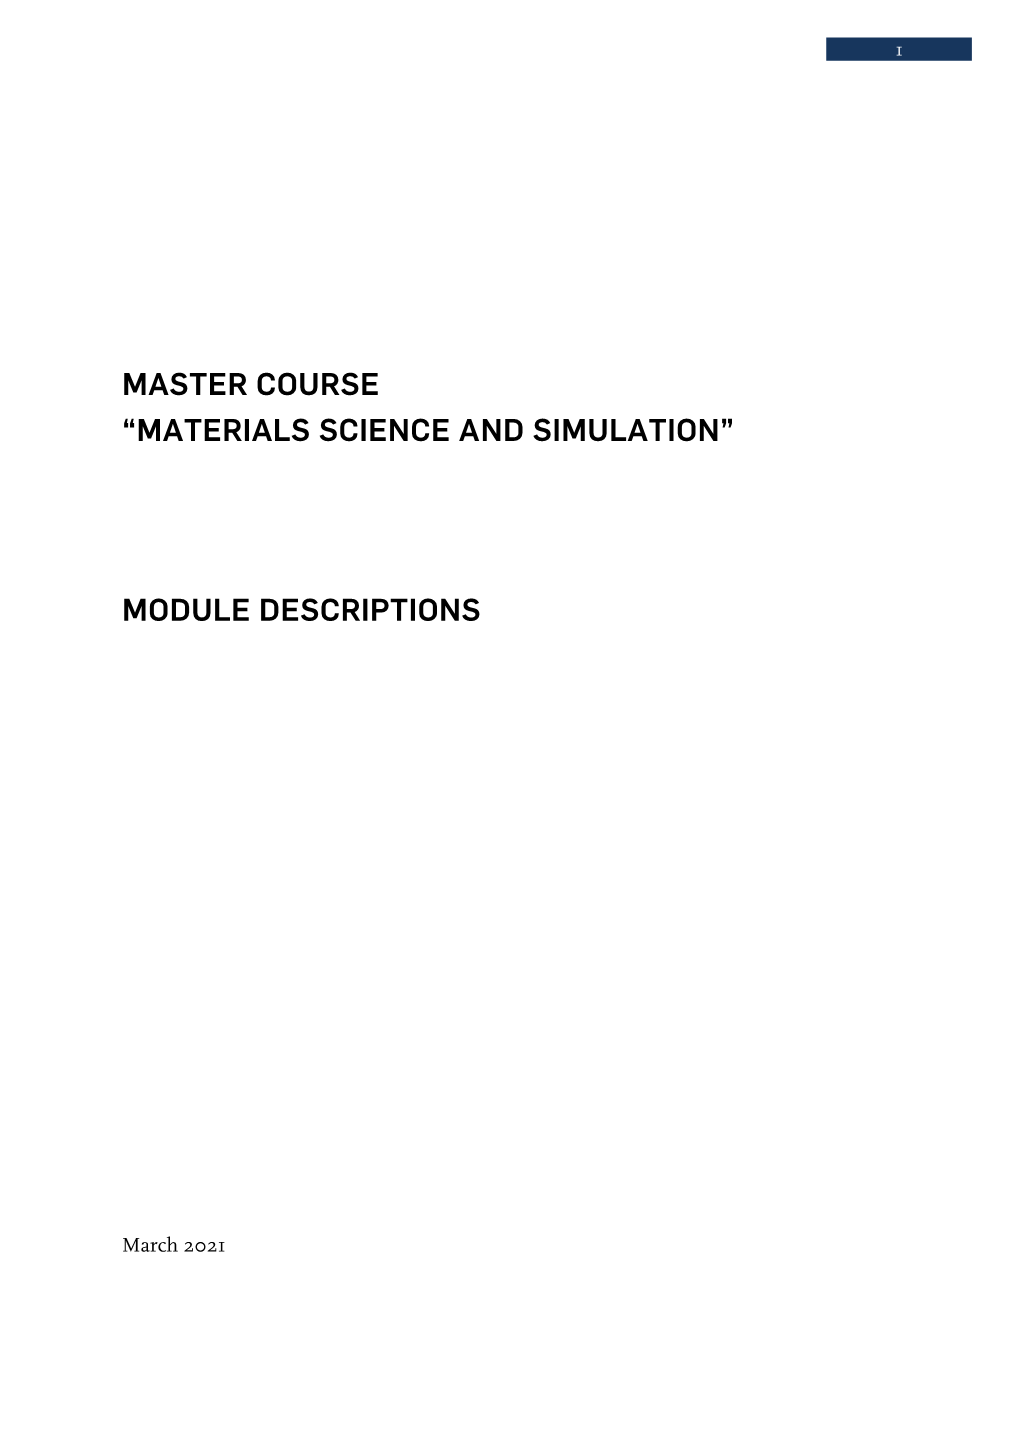 Master Course “Materials Science and Simulation”